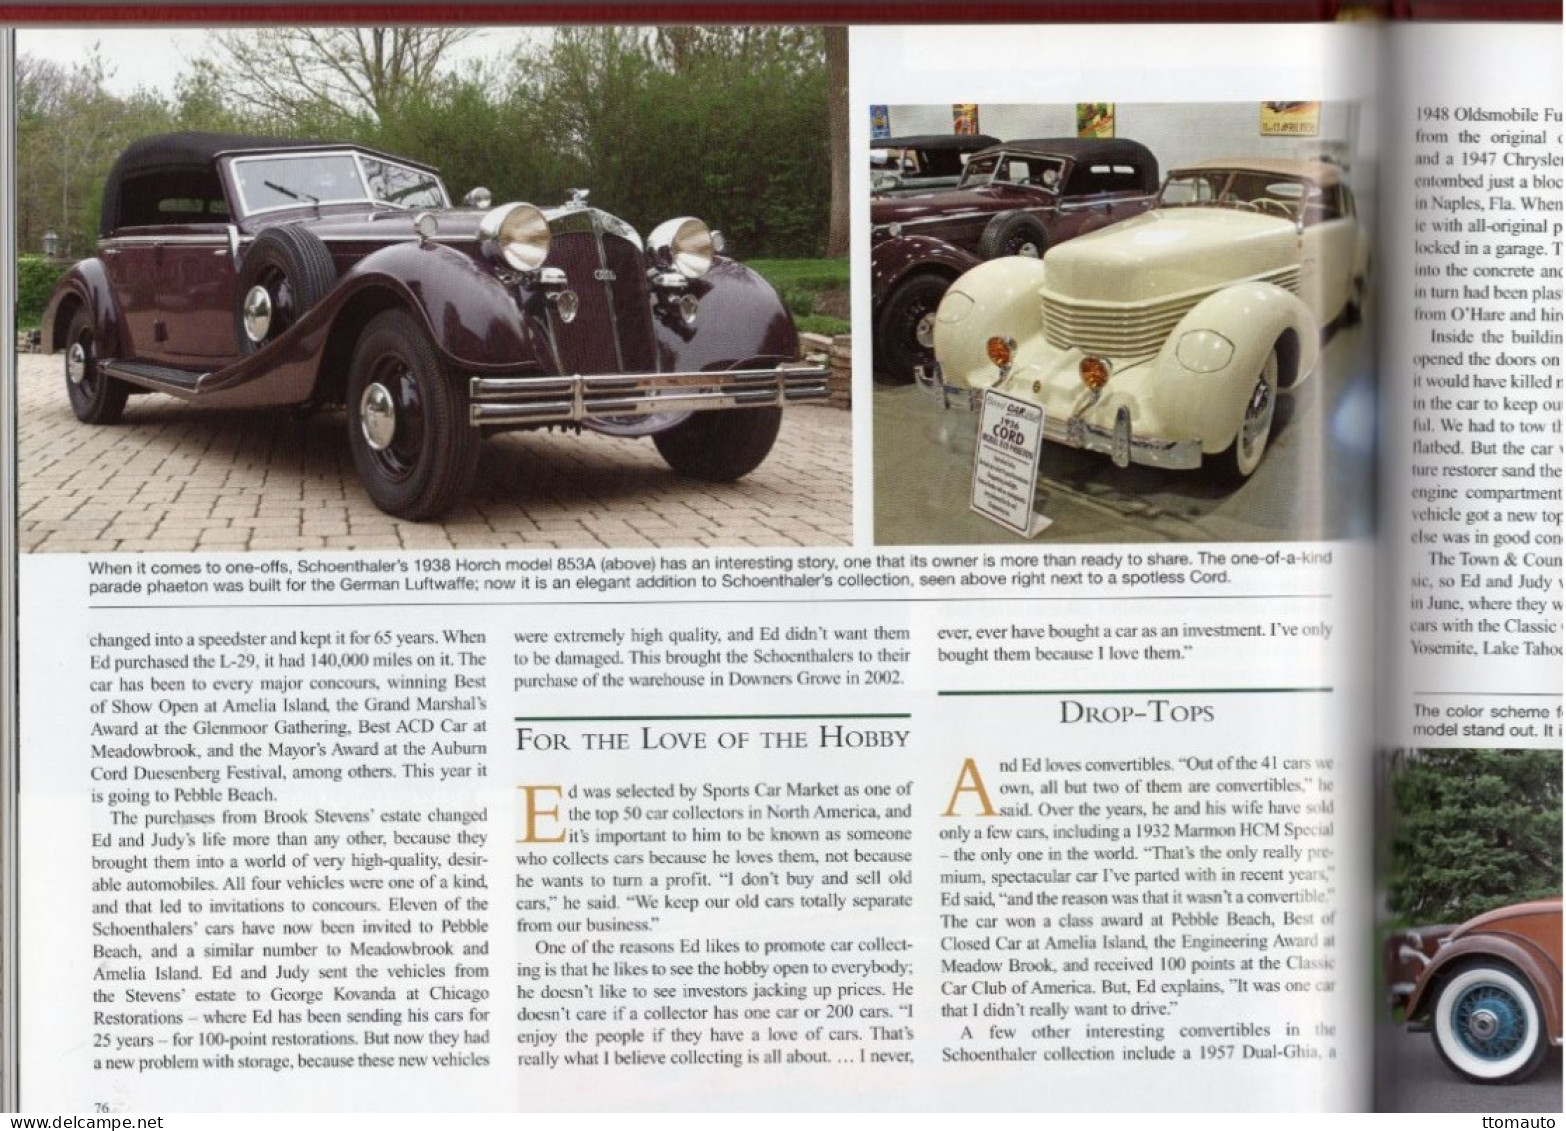 Automobile Quarterly Volume 49 Number 2 (Apr 2009) - Mercedes W165-Hudson-OSCA - FREE SHIPPING TO EUROPE & US - Transport